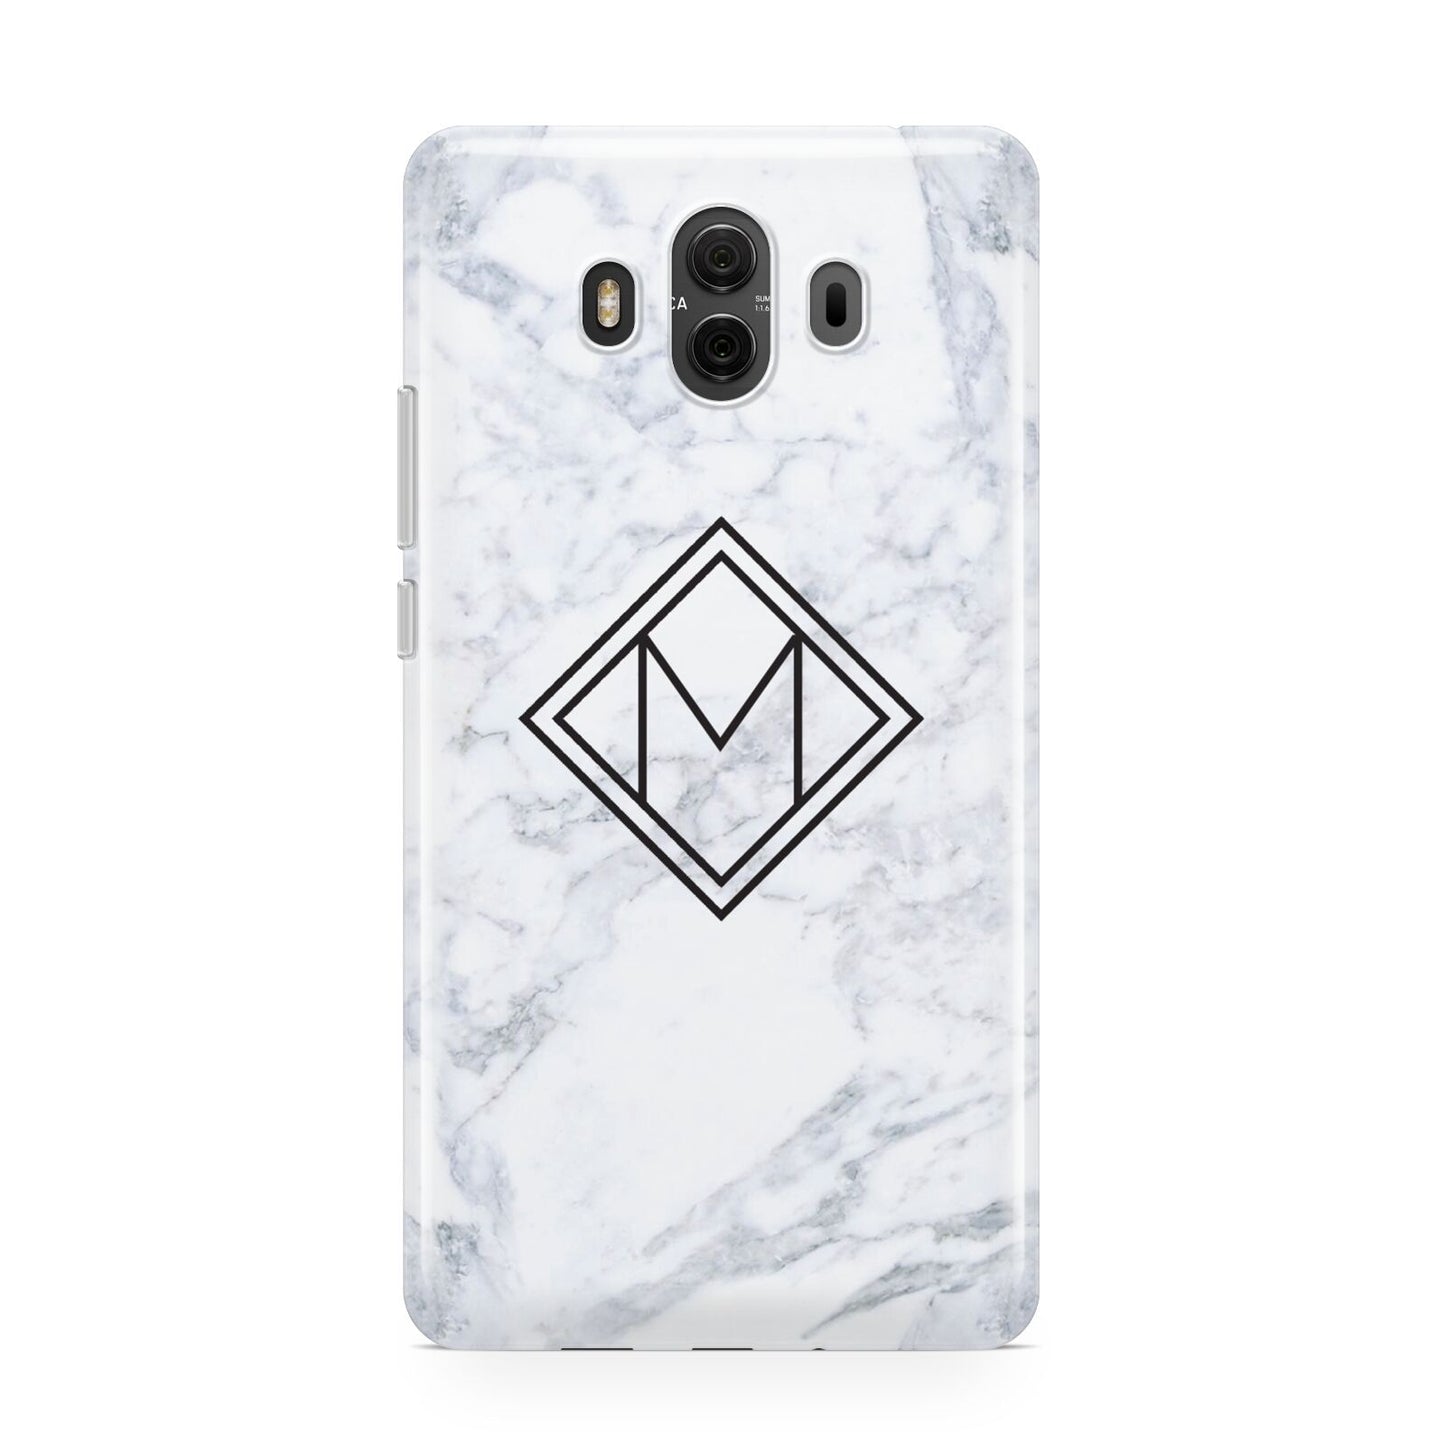 Personalised Marble Customised Initials Huawei Mate 10 Protective Phone Case